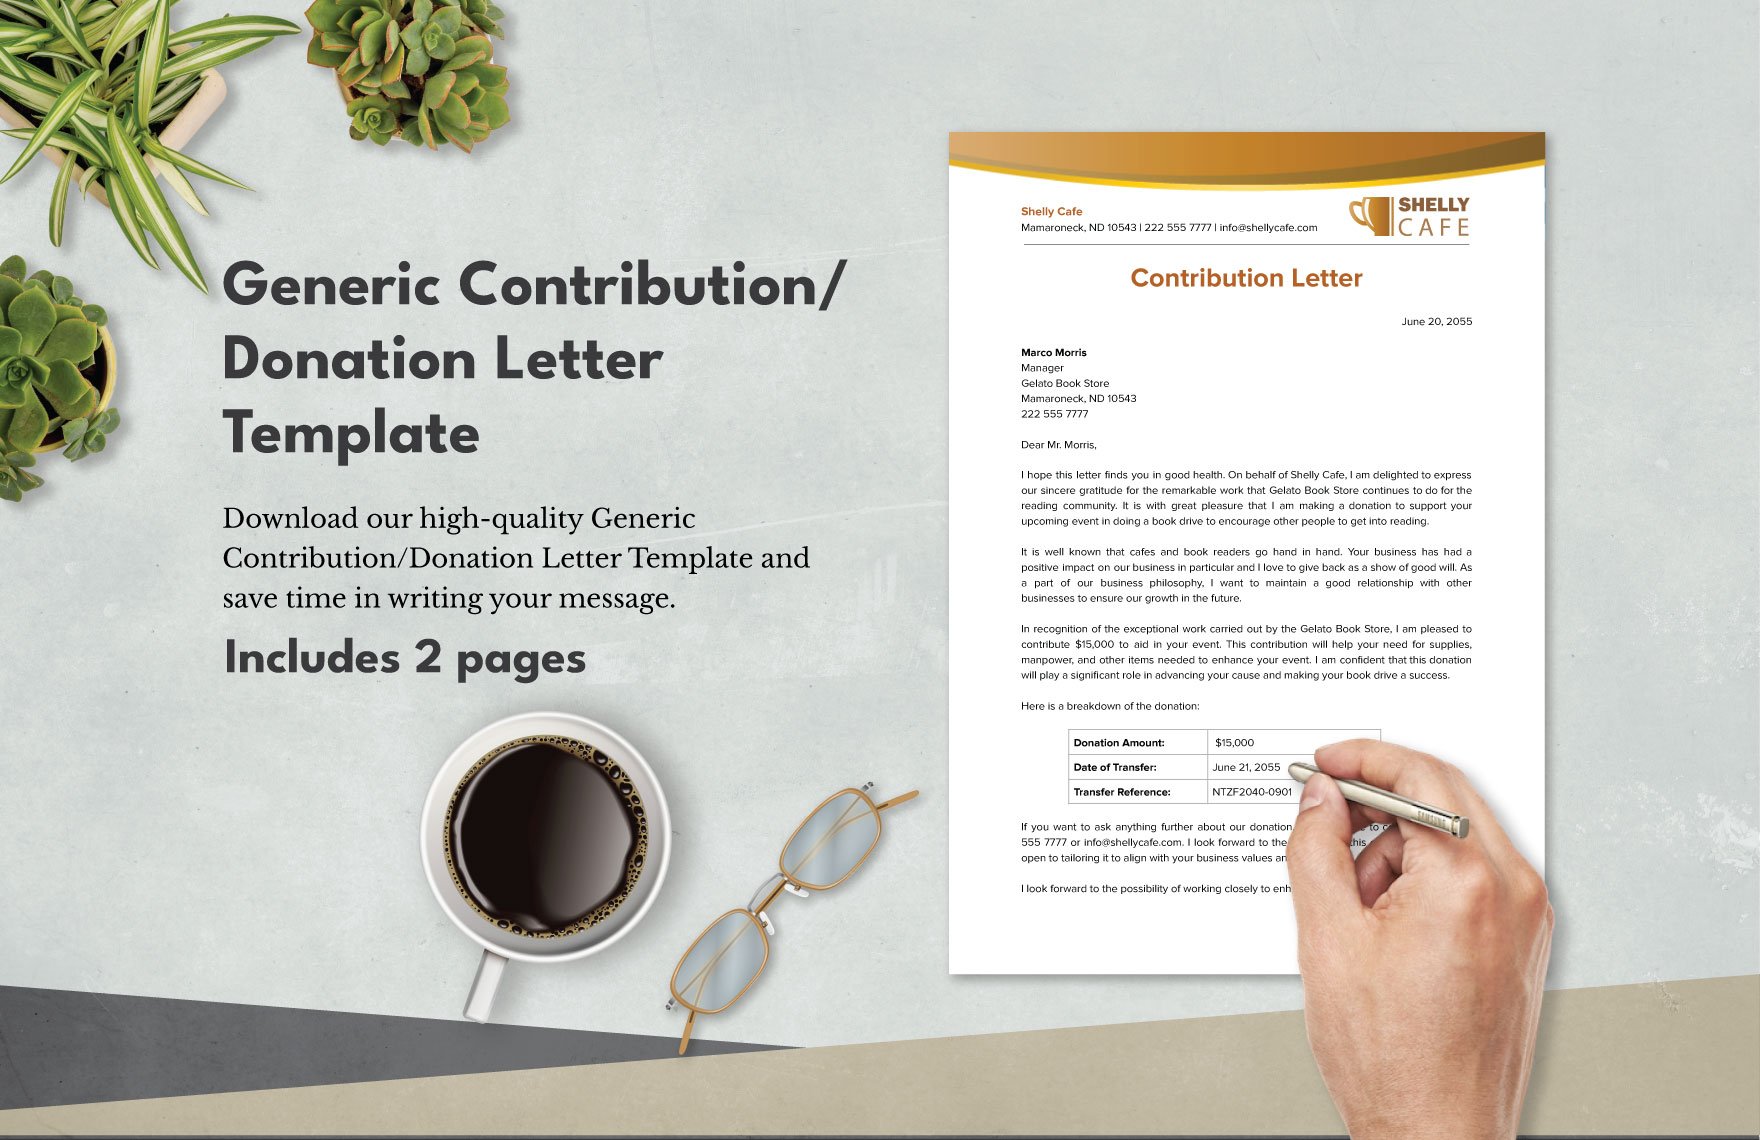 Generic Contribution/Donation Letter Template